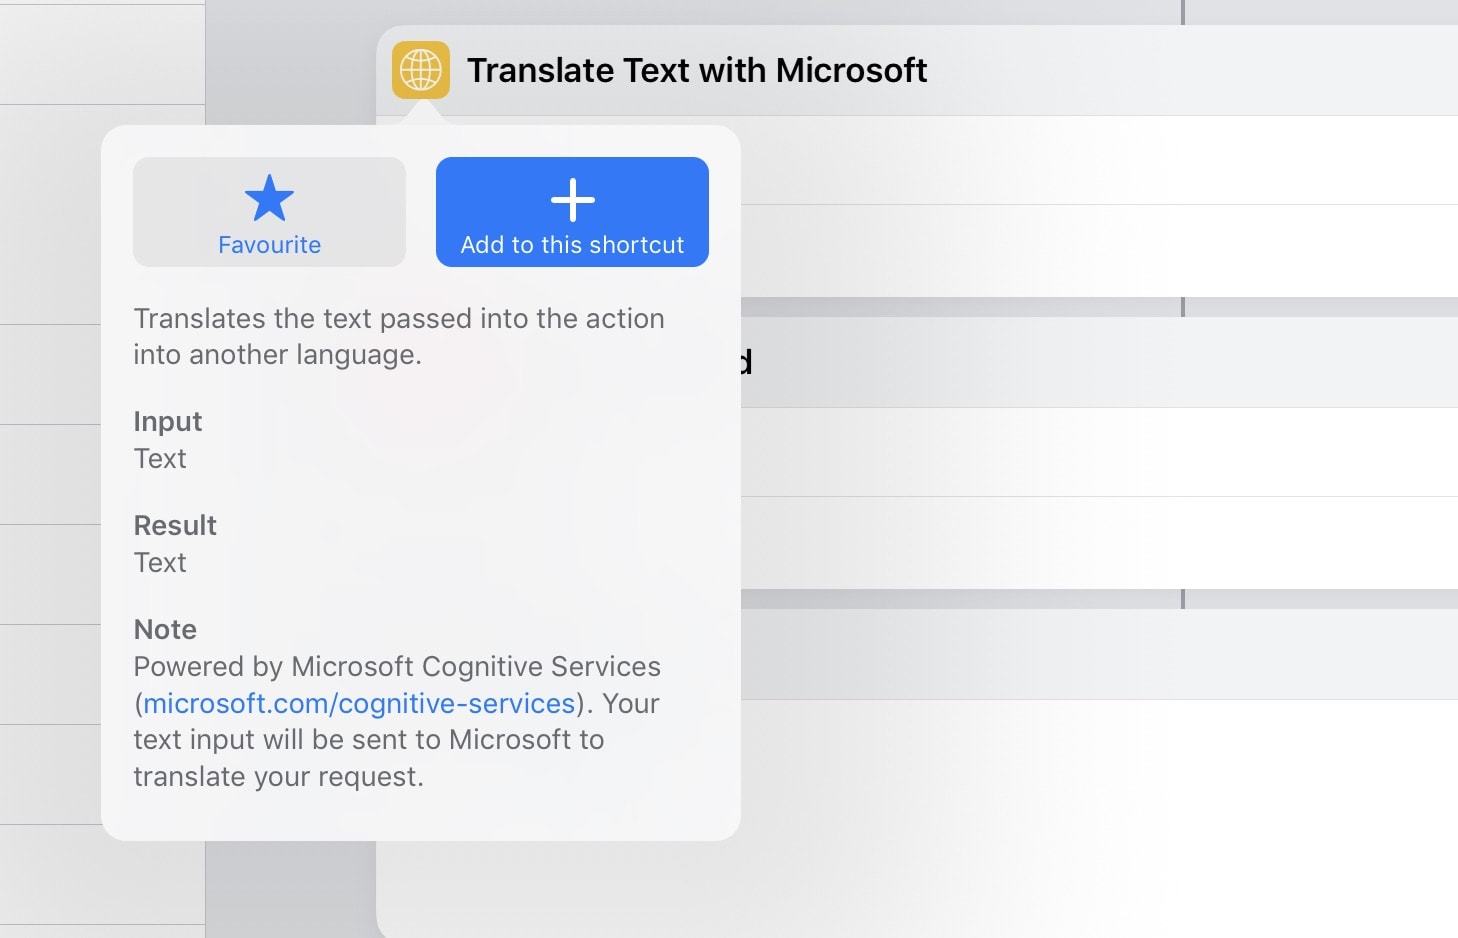 Translation is powered by Microsoft.